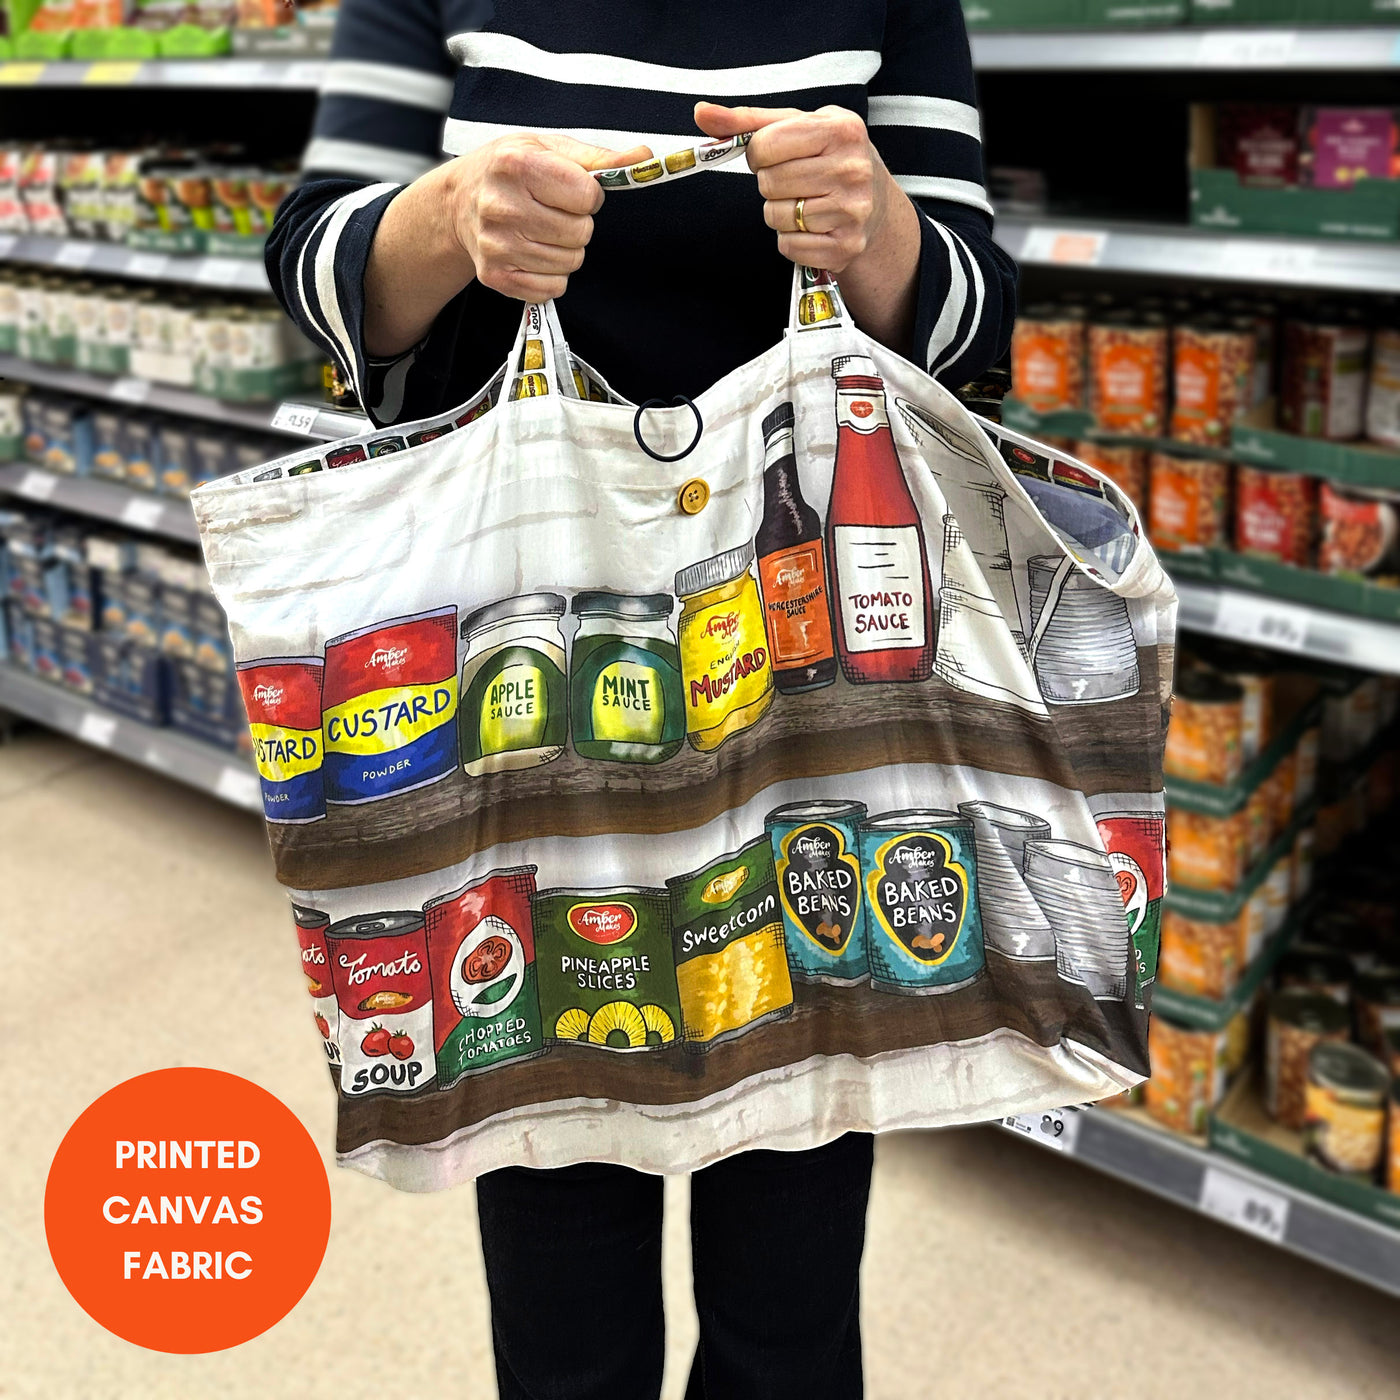 The Superbmarket bag - The Grocery Sewing Kit